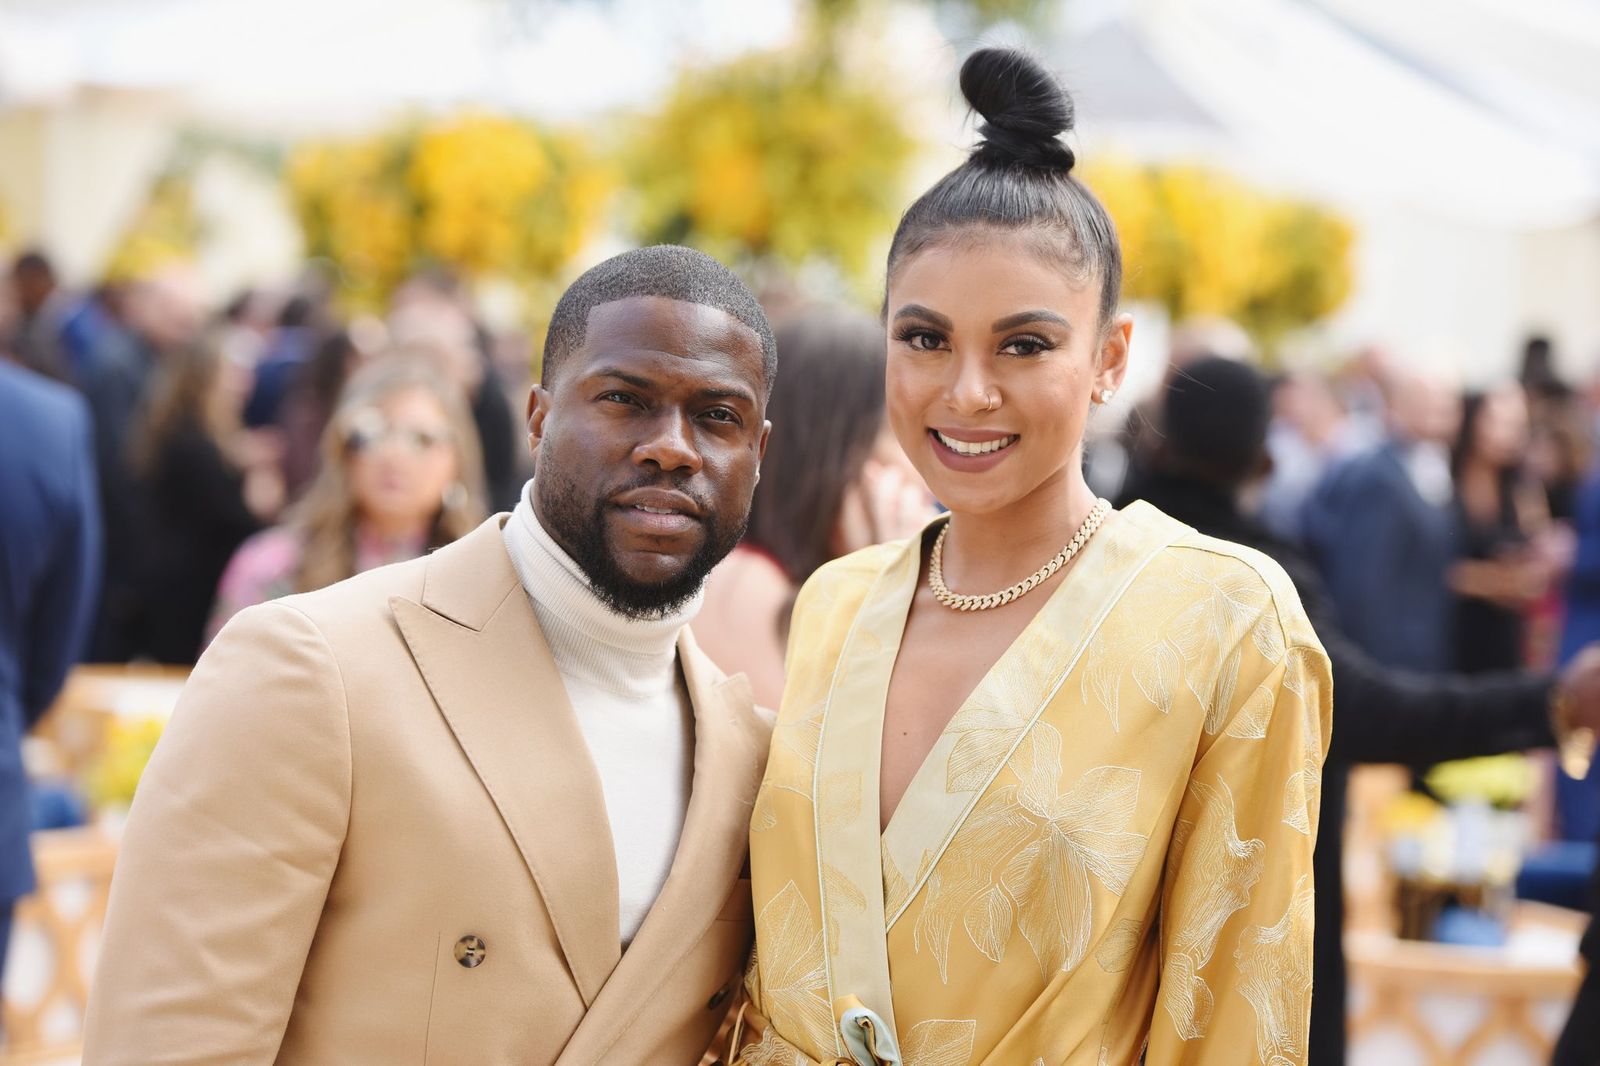 Kevin Hart and Eniko Parrish at Roc Nation's "The Brunch" on February 9, 2019 | Photo: Getty Images